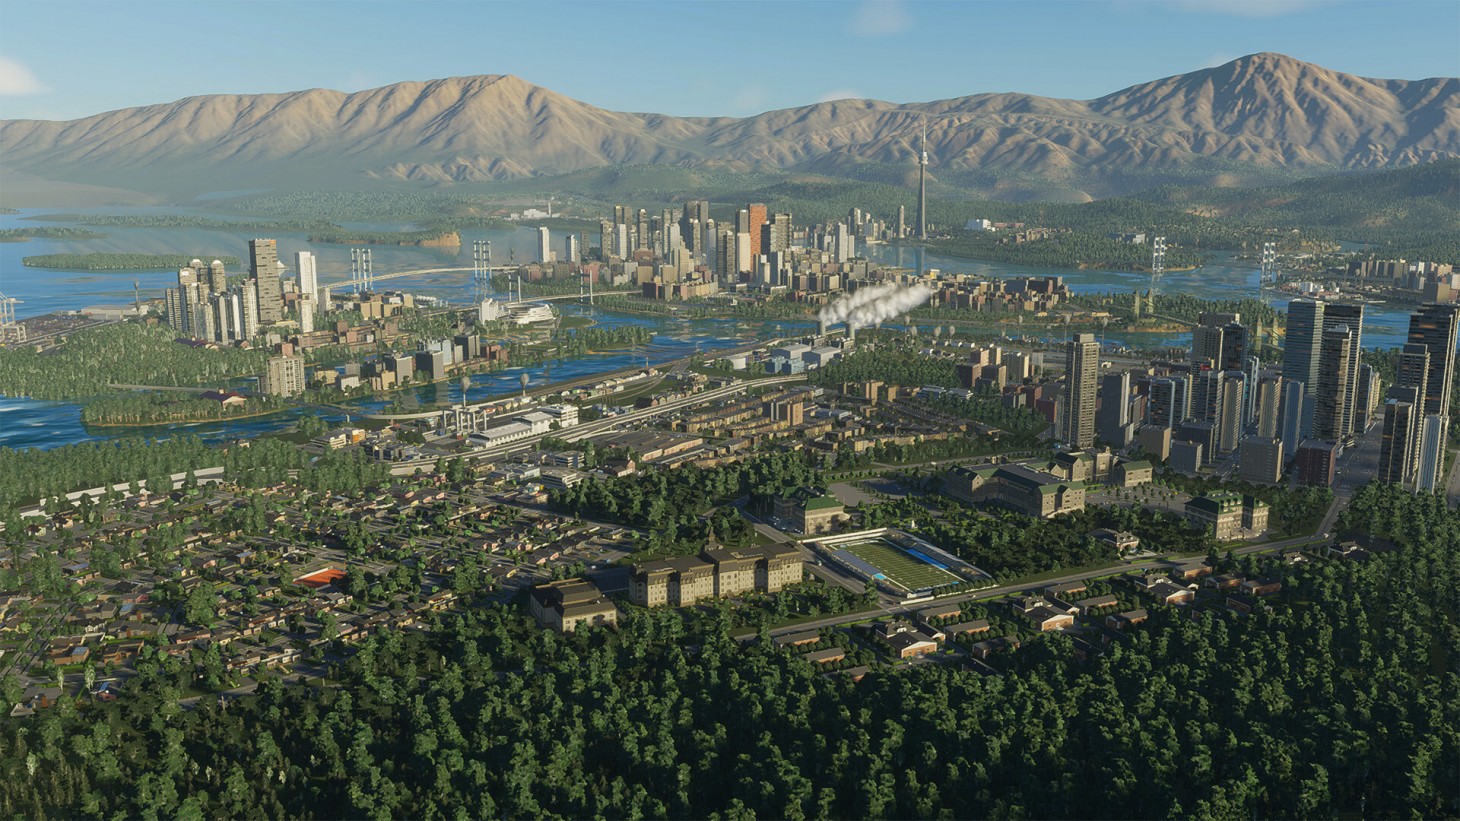 Mods Coming to Your Town in Cities: Skylines - Xbox One Edition - Xbox Wire